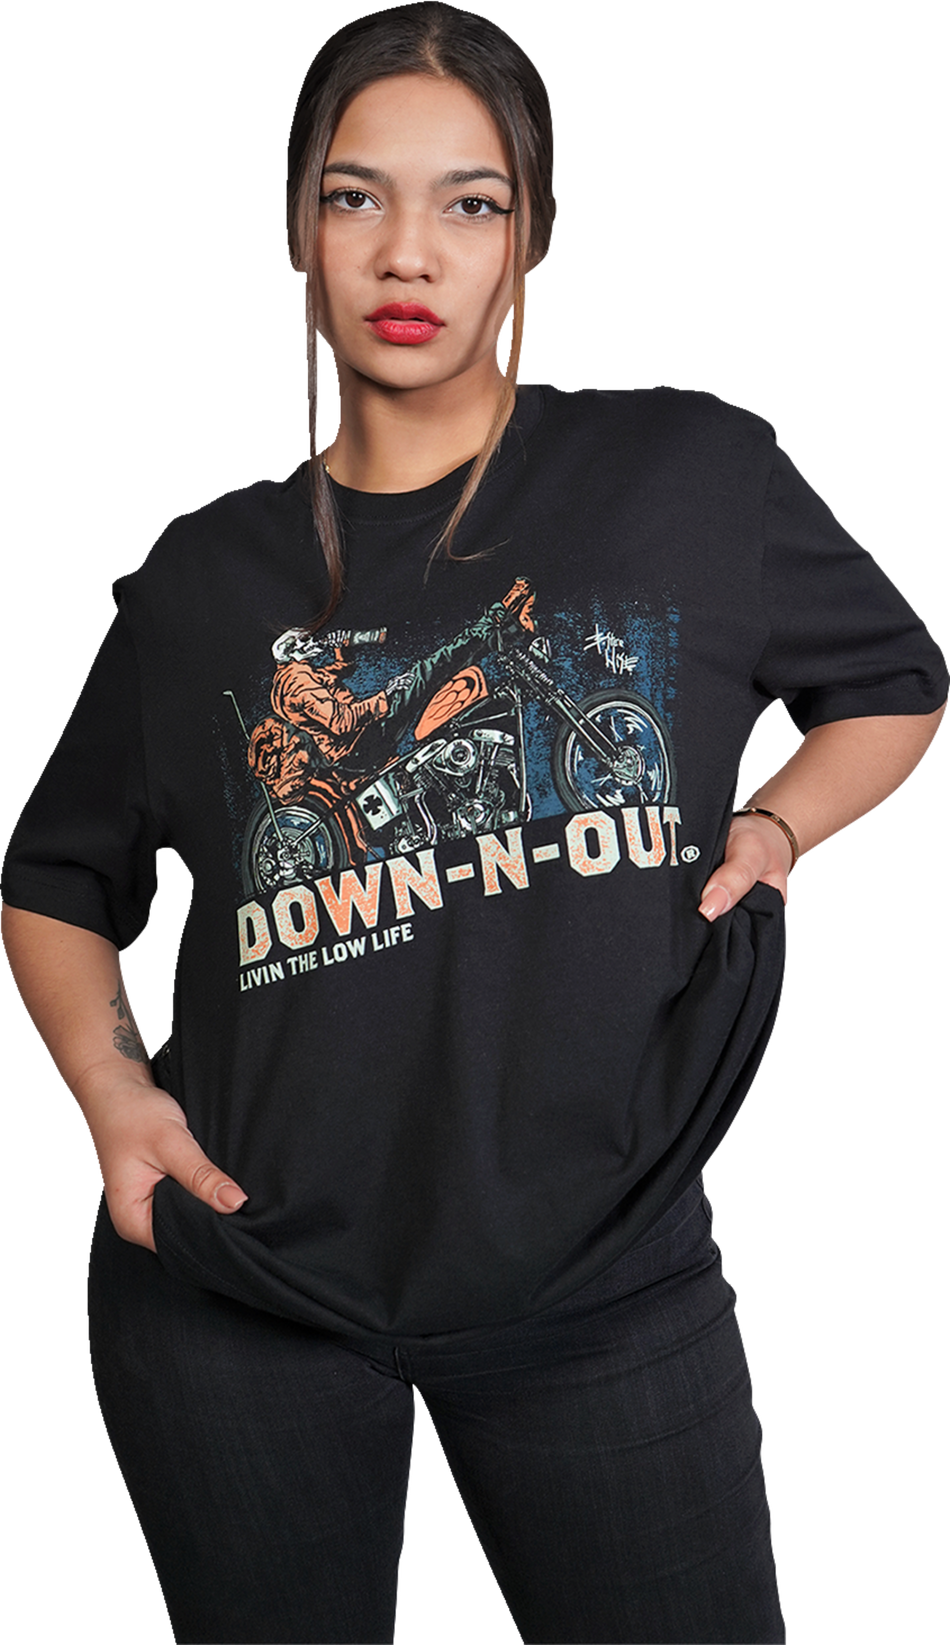 LETHAL THREAT Down-N-Out Party First Safety Second - Black - XL DT10043XL